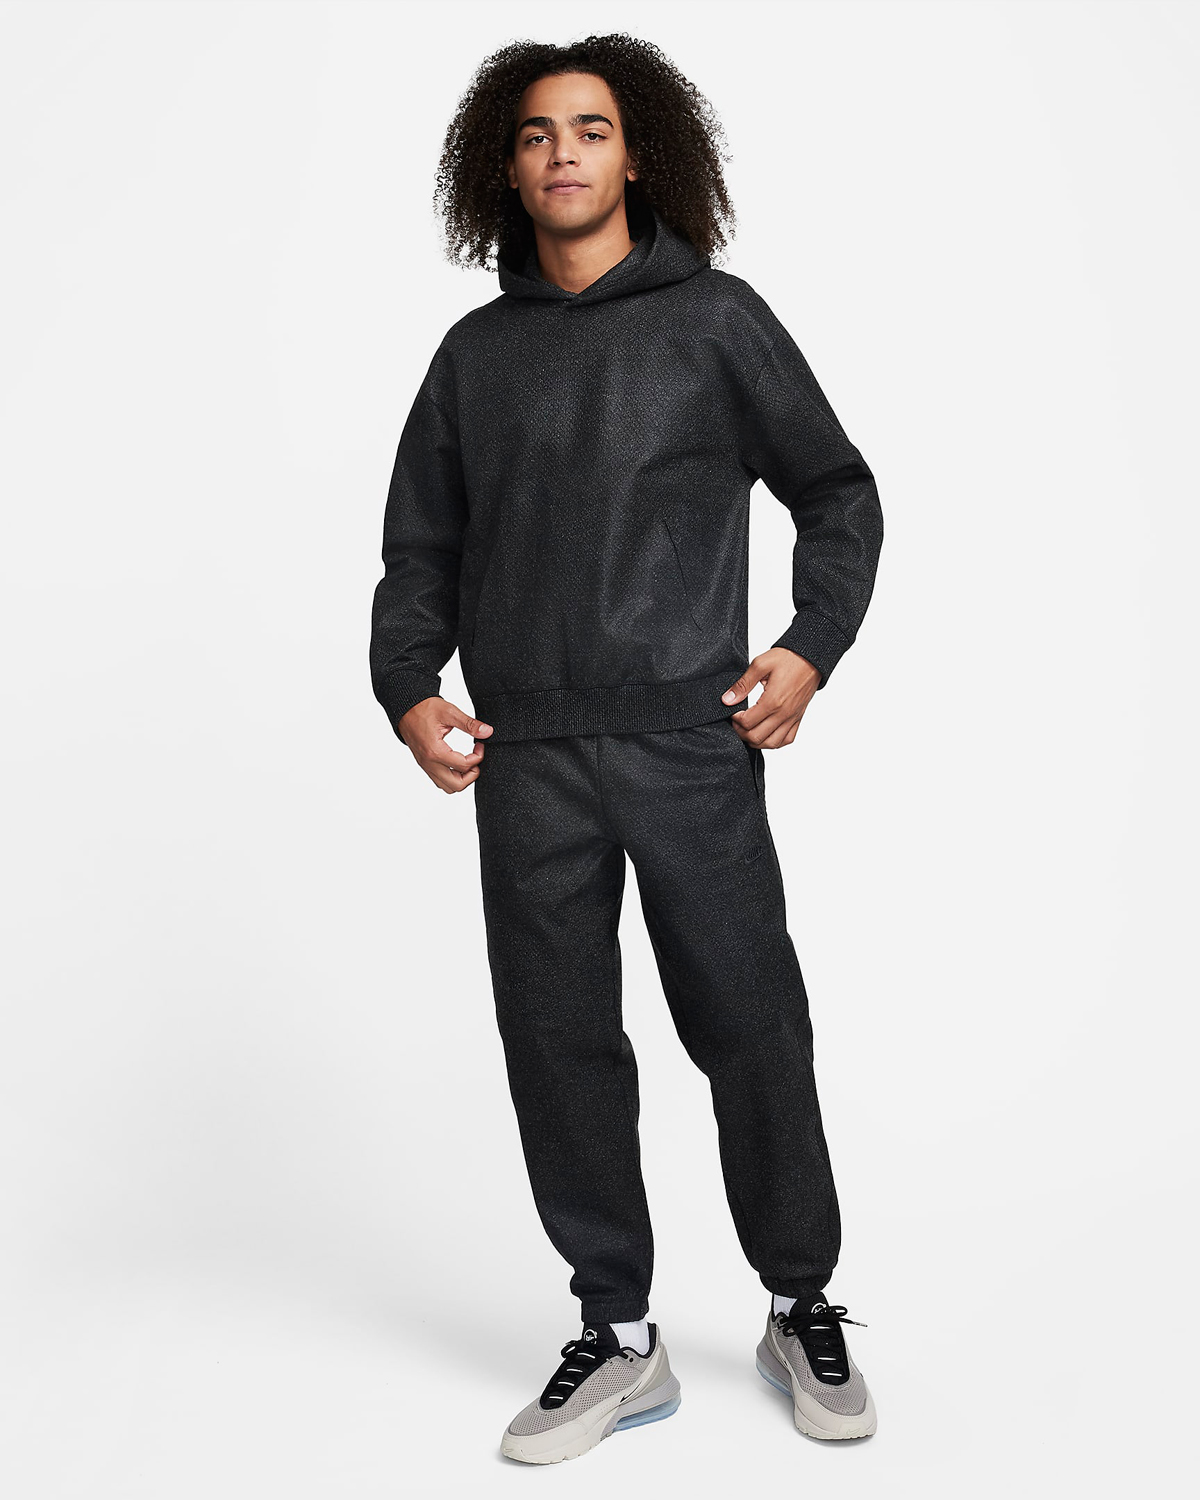 Nike-Forward-Hoodie-Pants-Anthracite-Outfit